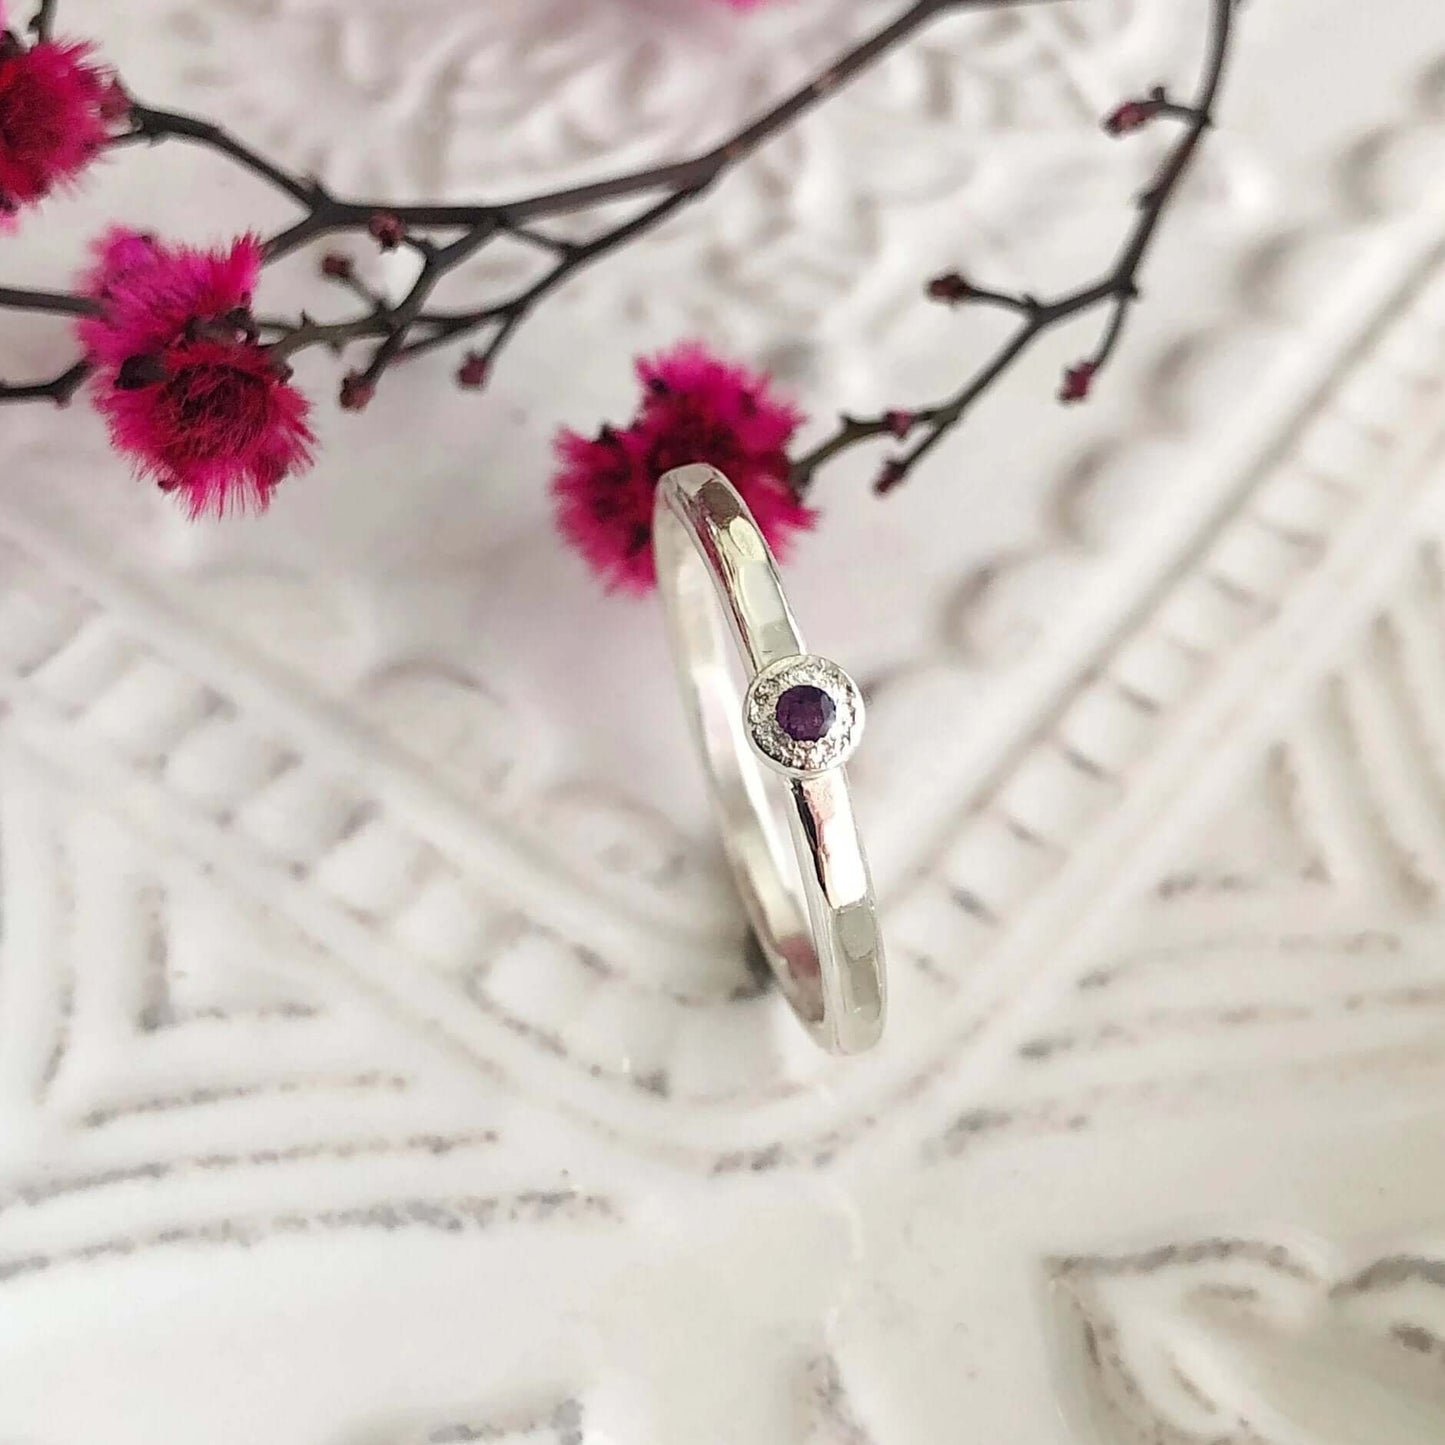 Sterling Silver & Amethyst Stacking Ring - Rebecca Cordingley